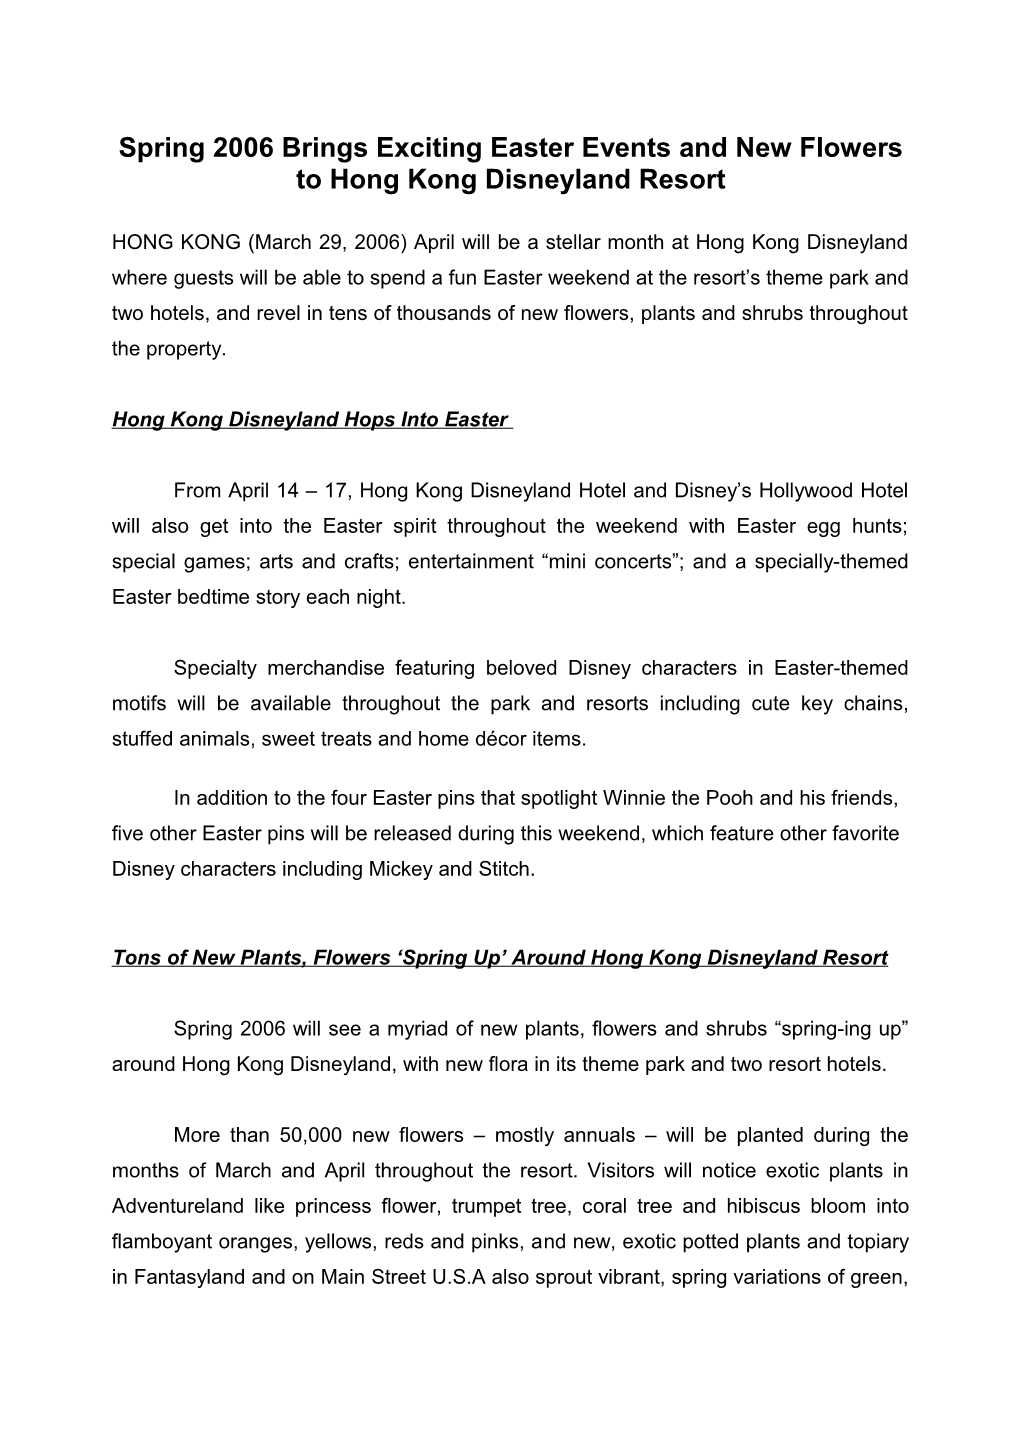 Spring 2006 Brings Exciting Easter Events and New Flowers to Hong Kong Disneyland Resort